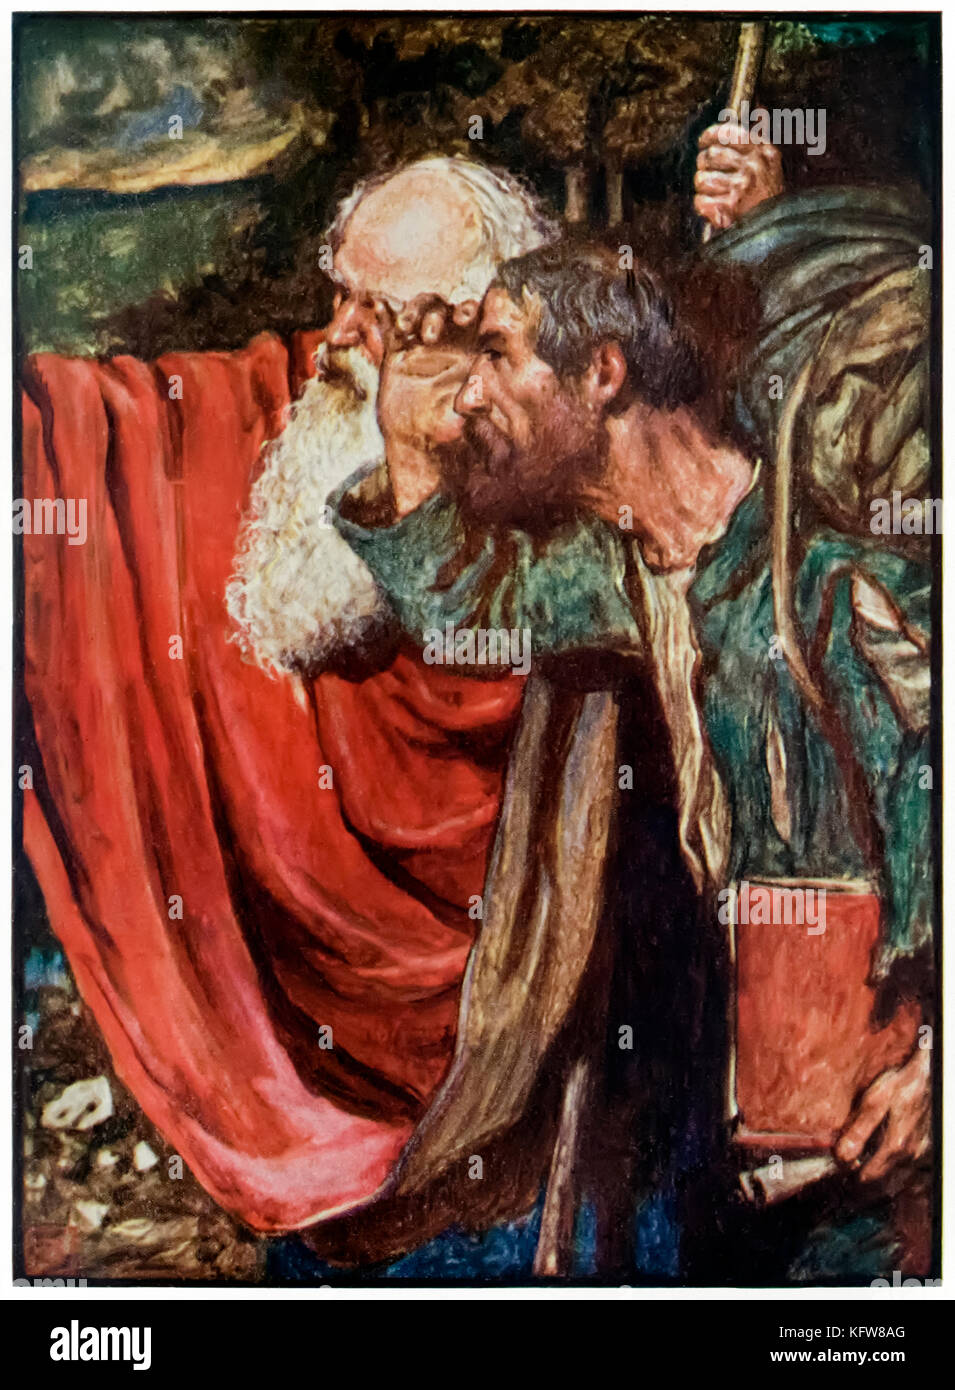 “Evangelist points out the way to the Wicket Gate” from ‘The Pilgrim’s Progress From This World, To That Which Is To Come’ by John Bunyan (1628-1688). Illustration by Byam Shaw (1872-1919) showing Evangelist showing Christian the way. See more information below. Stock Photo